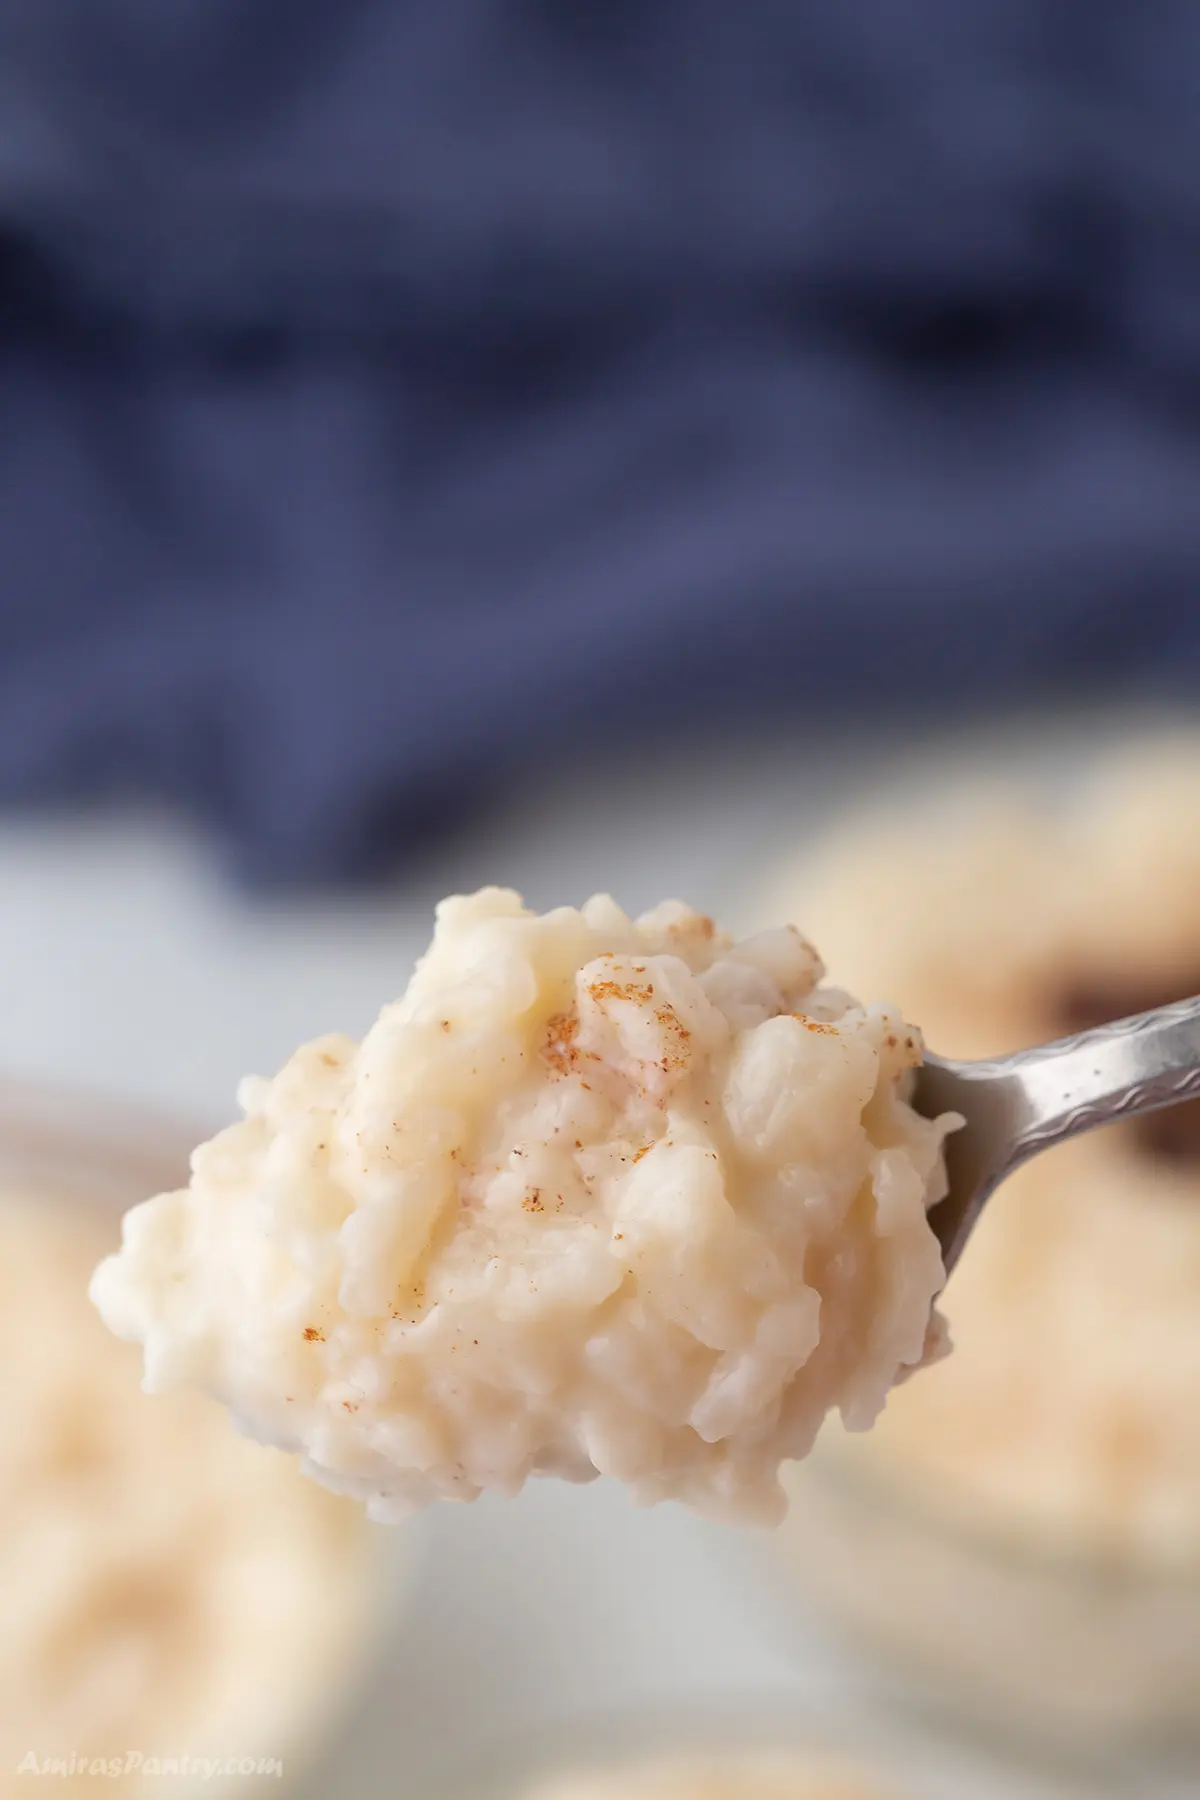 A spoon scooping some creamy rice pudding.